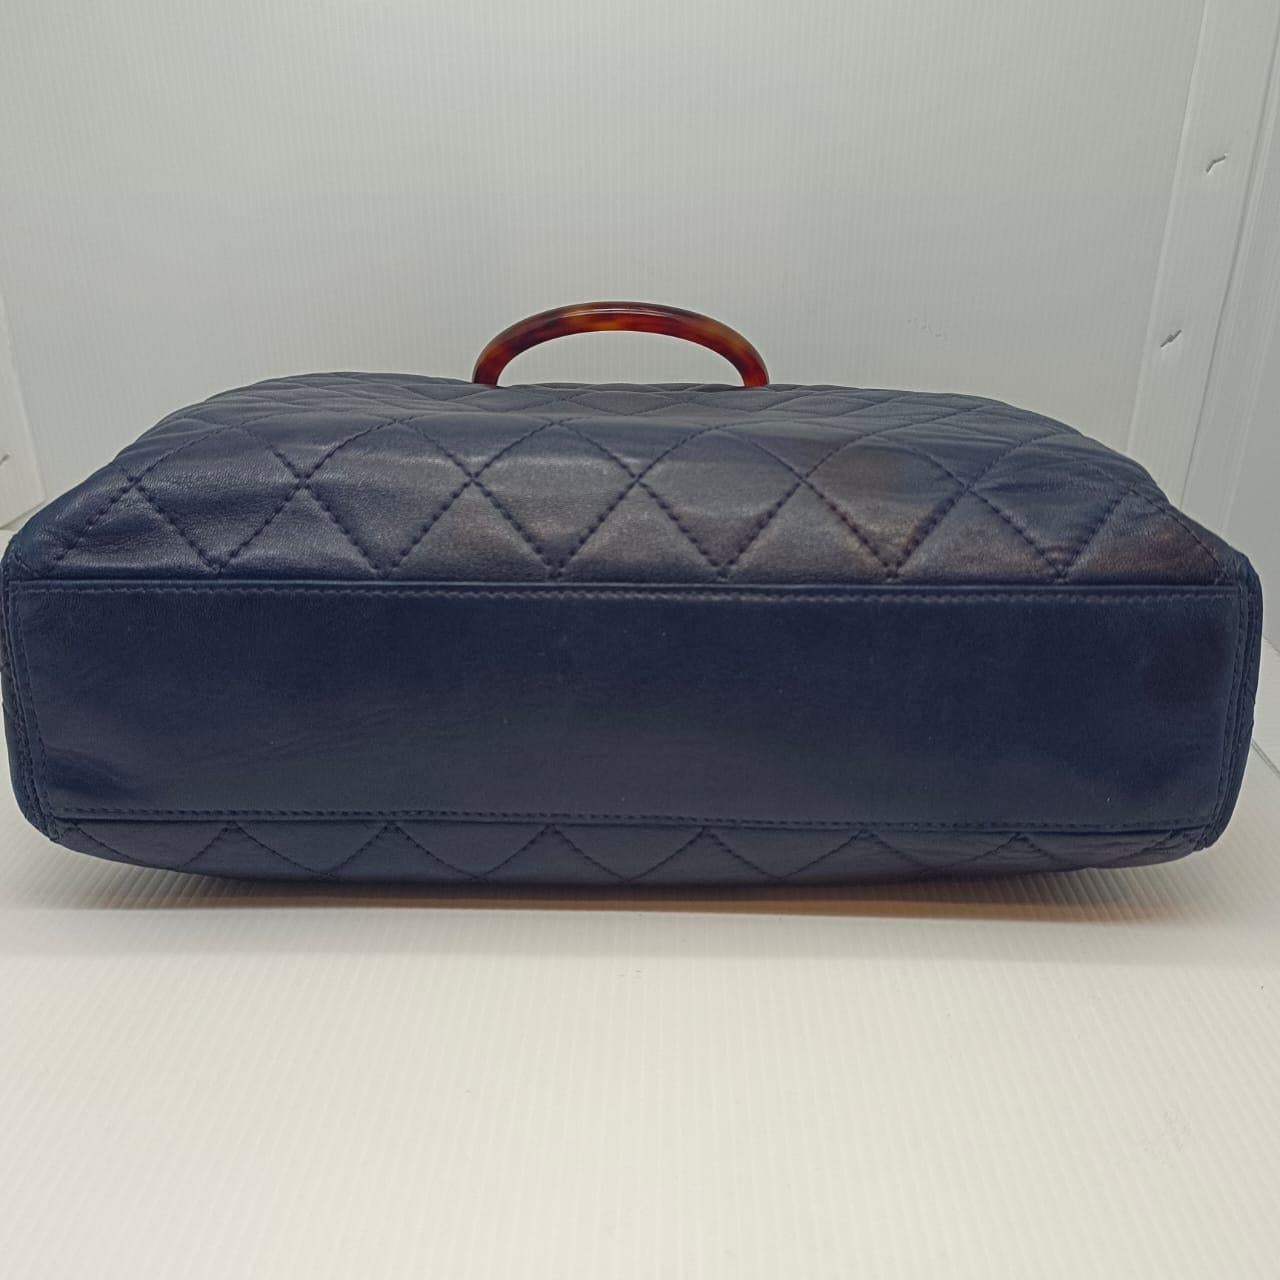 Vintage Chanel Navy Lambskin Quilted Tote with Tortoiseshell Handles 5